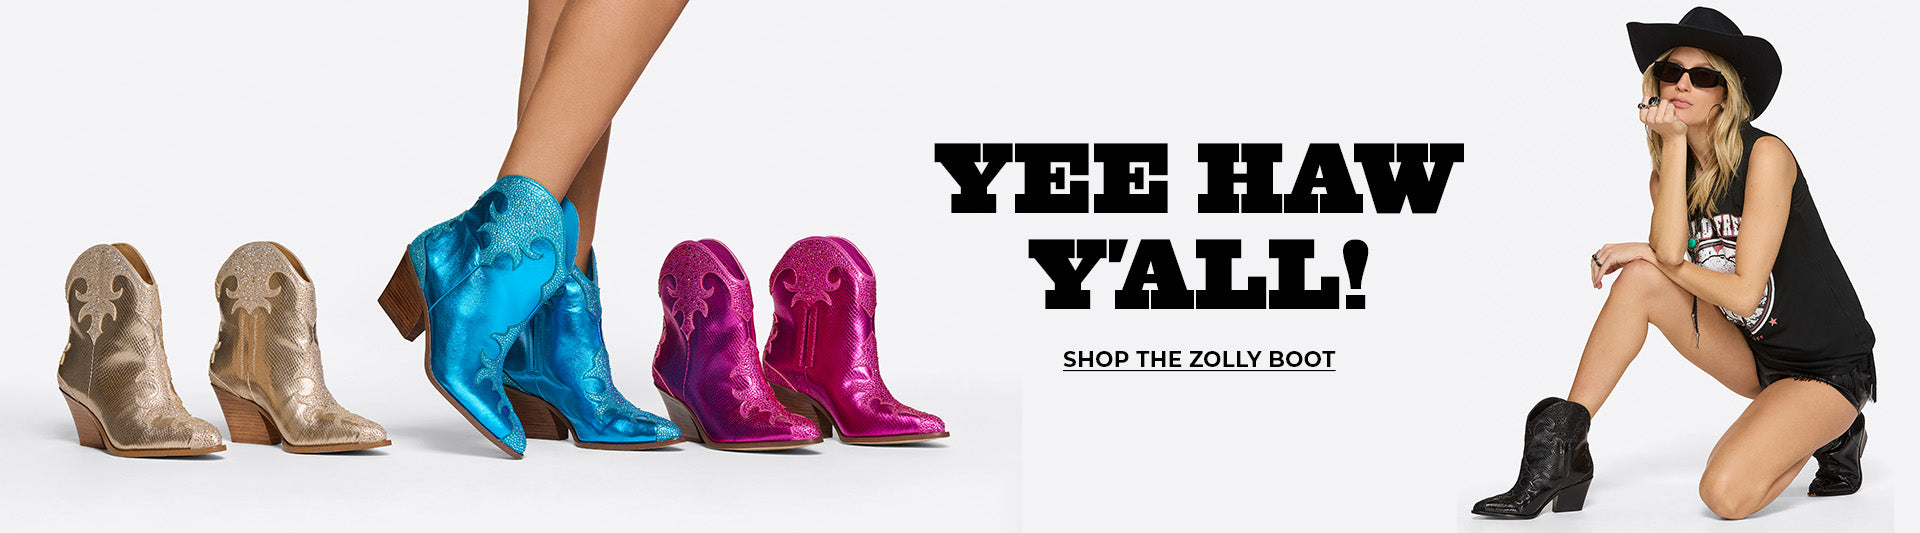 Yee Haw Y'all Shop the Zolly Boot